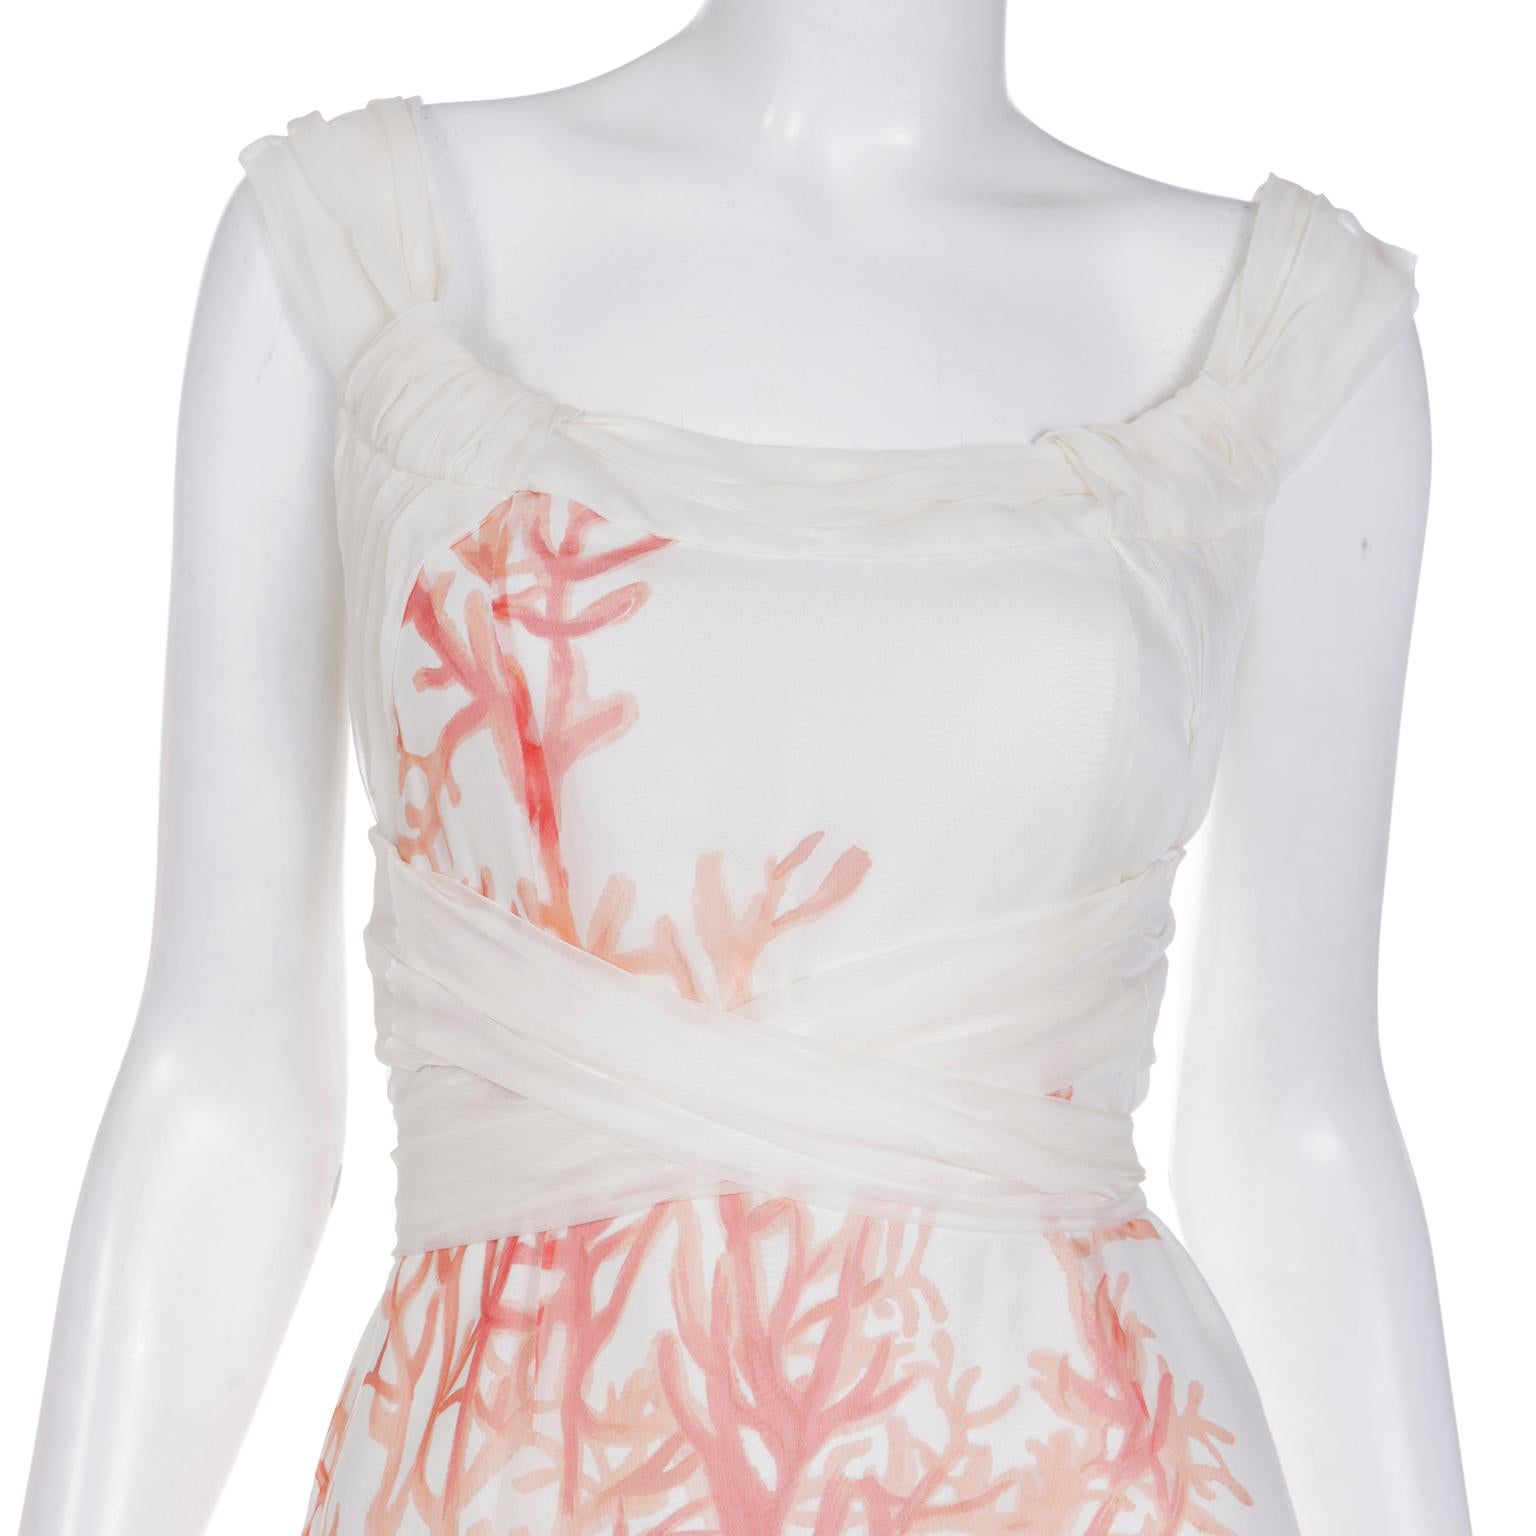 Early 2000s Valentino Ivory Silk Chiffon Coral Print Dress With Long Sash For Sale 5